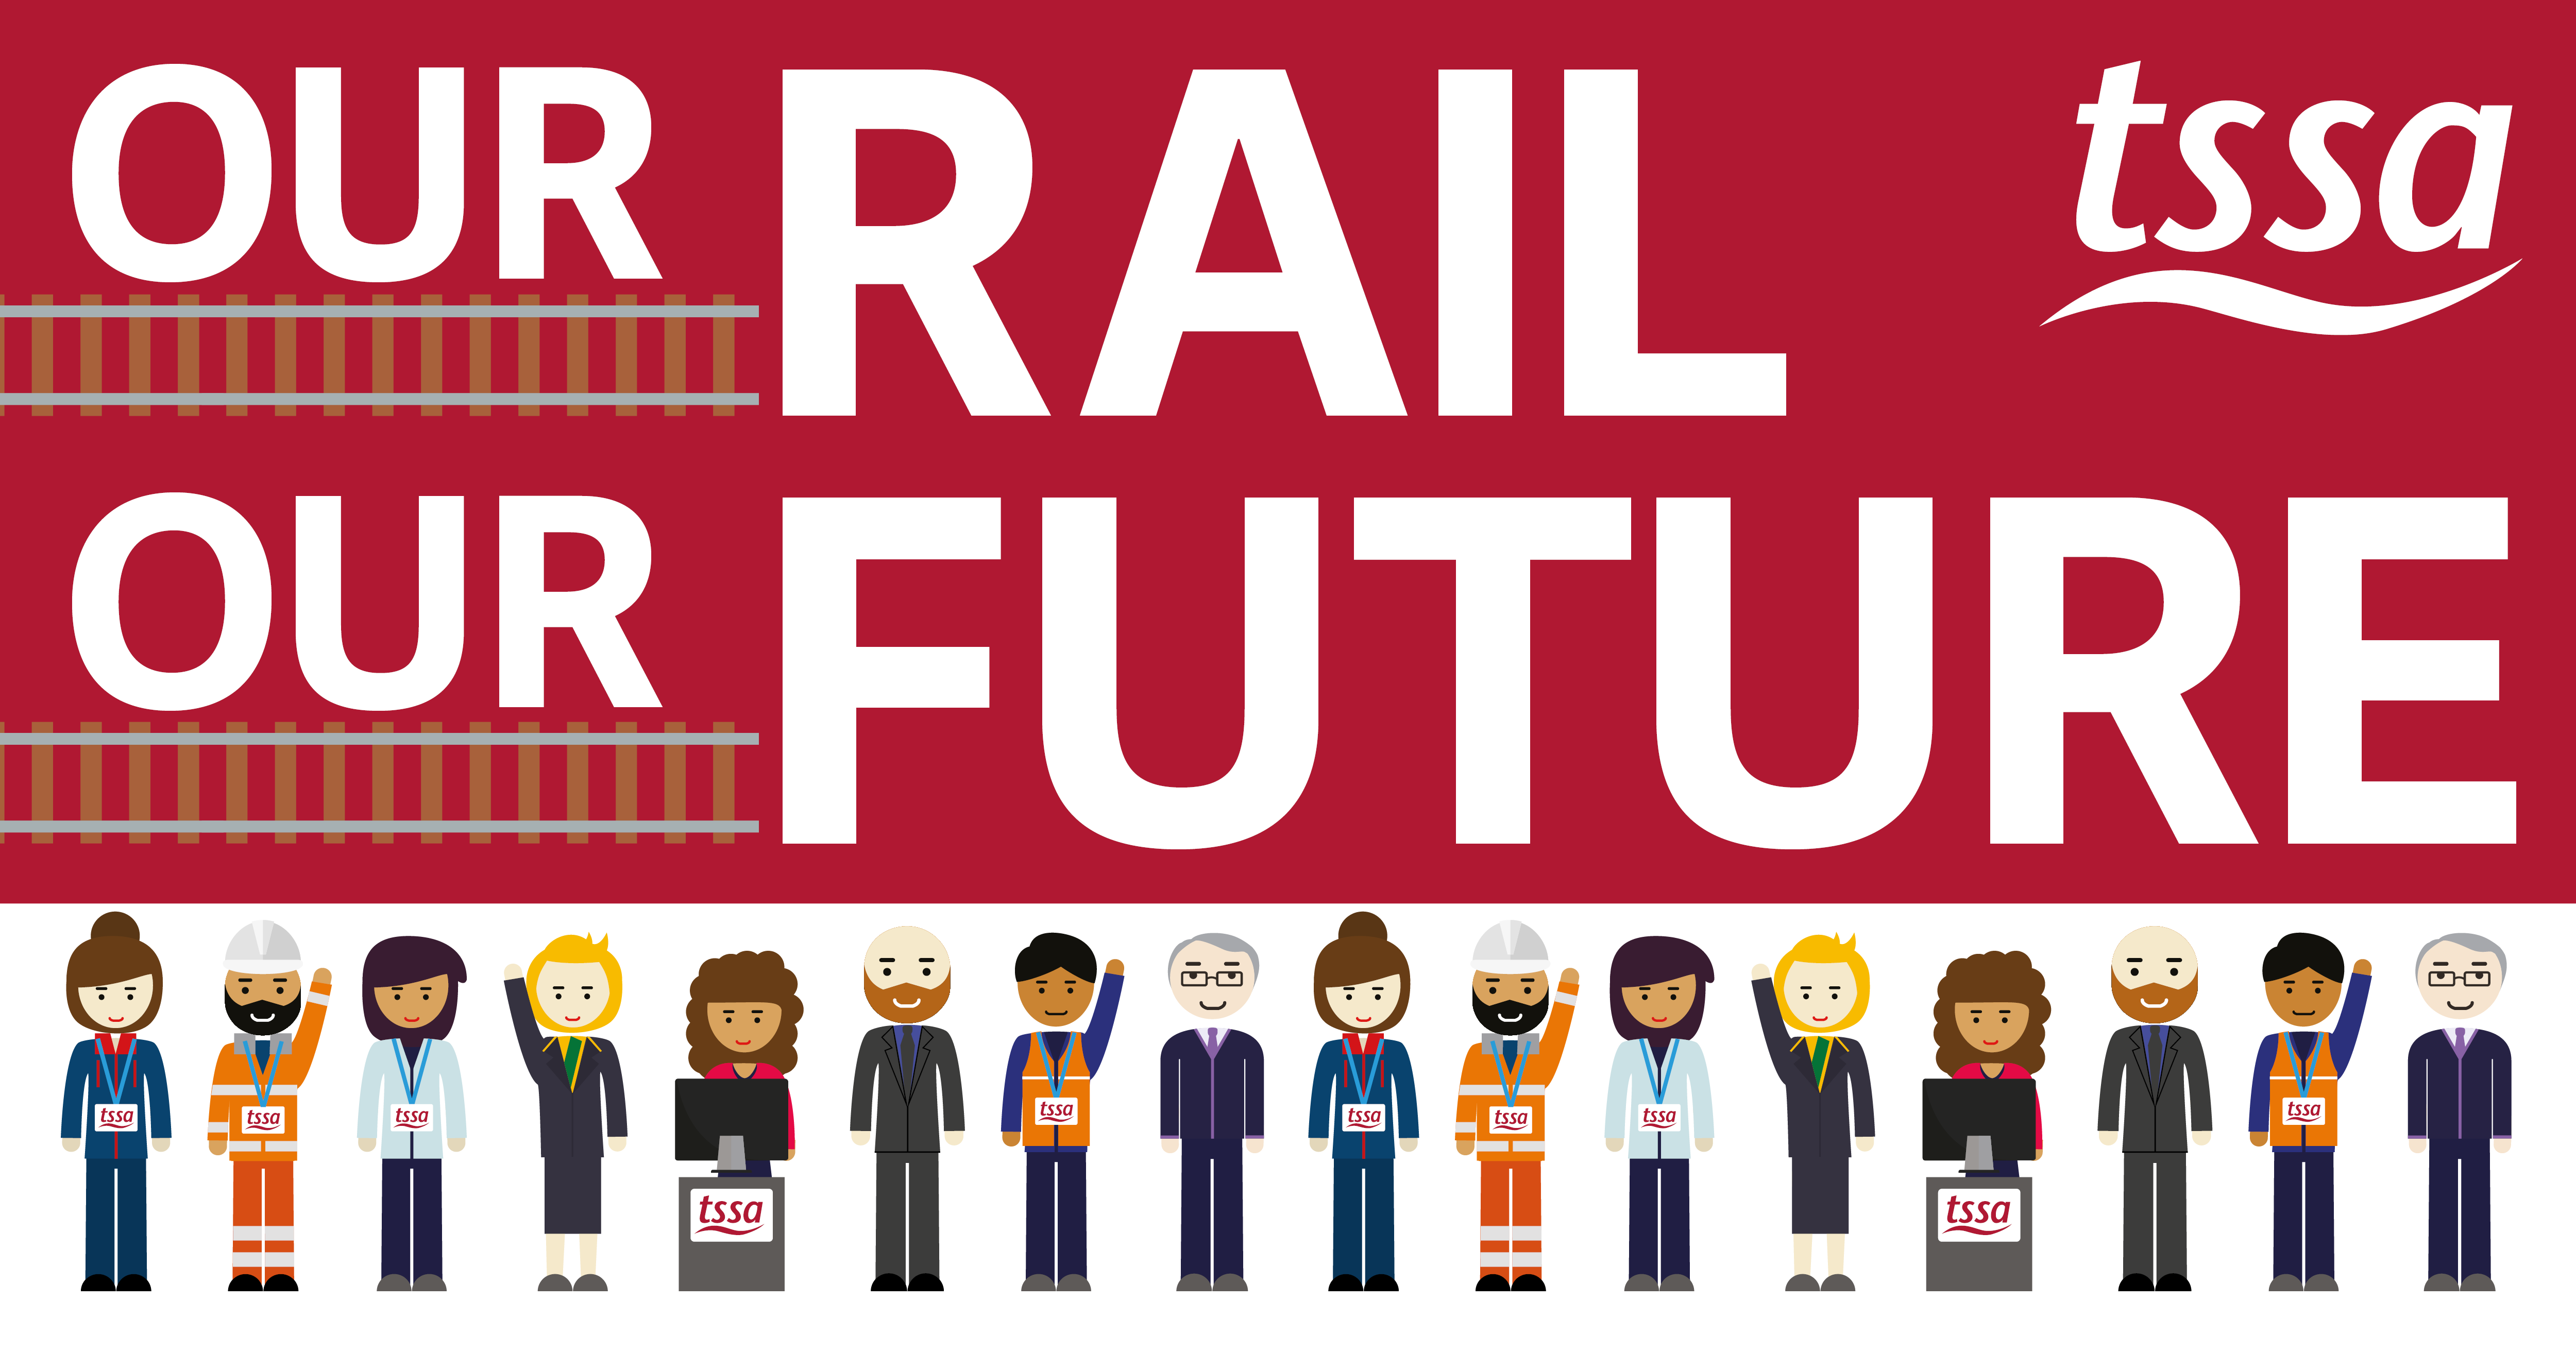 Campaign image with title: Our Rail Our Future. Cartoon railway workers along the bottom some with hands in the air.